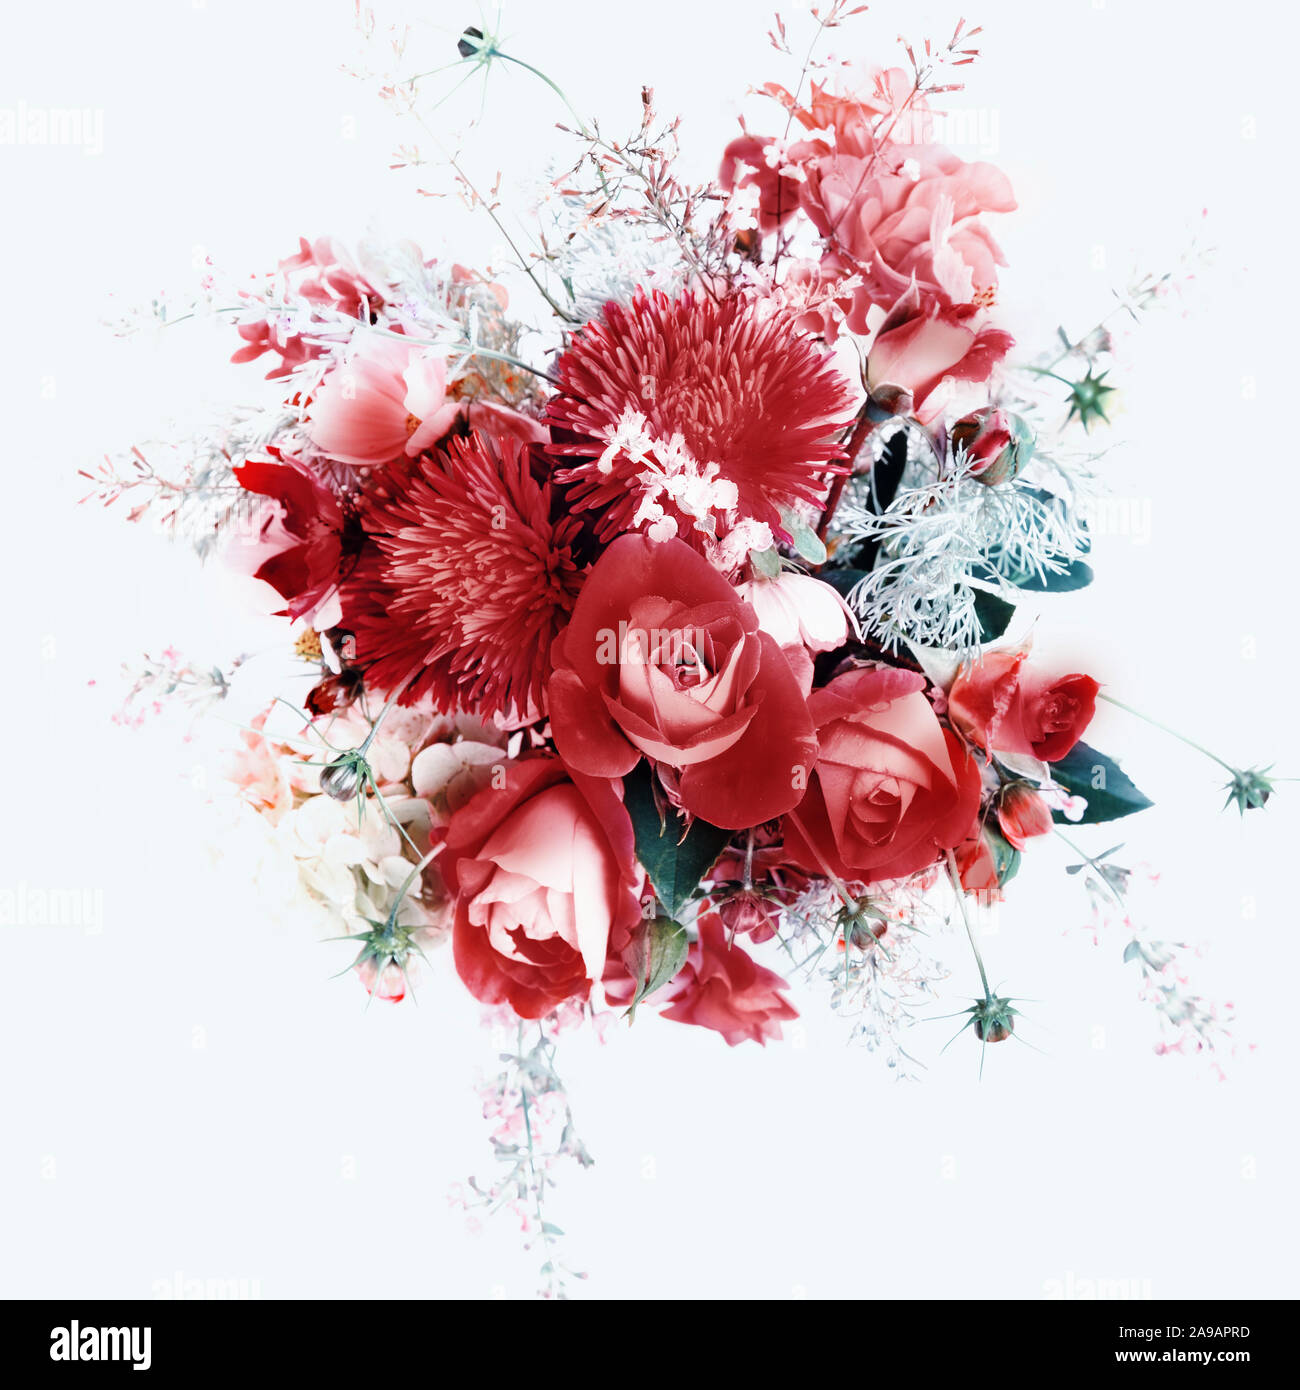 Bouquet of flowers in red, shades of red, Colors autumn winter 2020. Roses, berries, chrysanthemum, asters, kosmeja, hydrangea, wormwood. Stock Photo